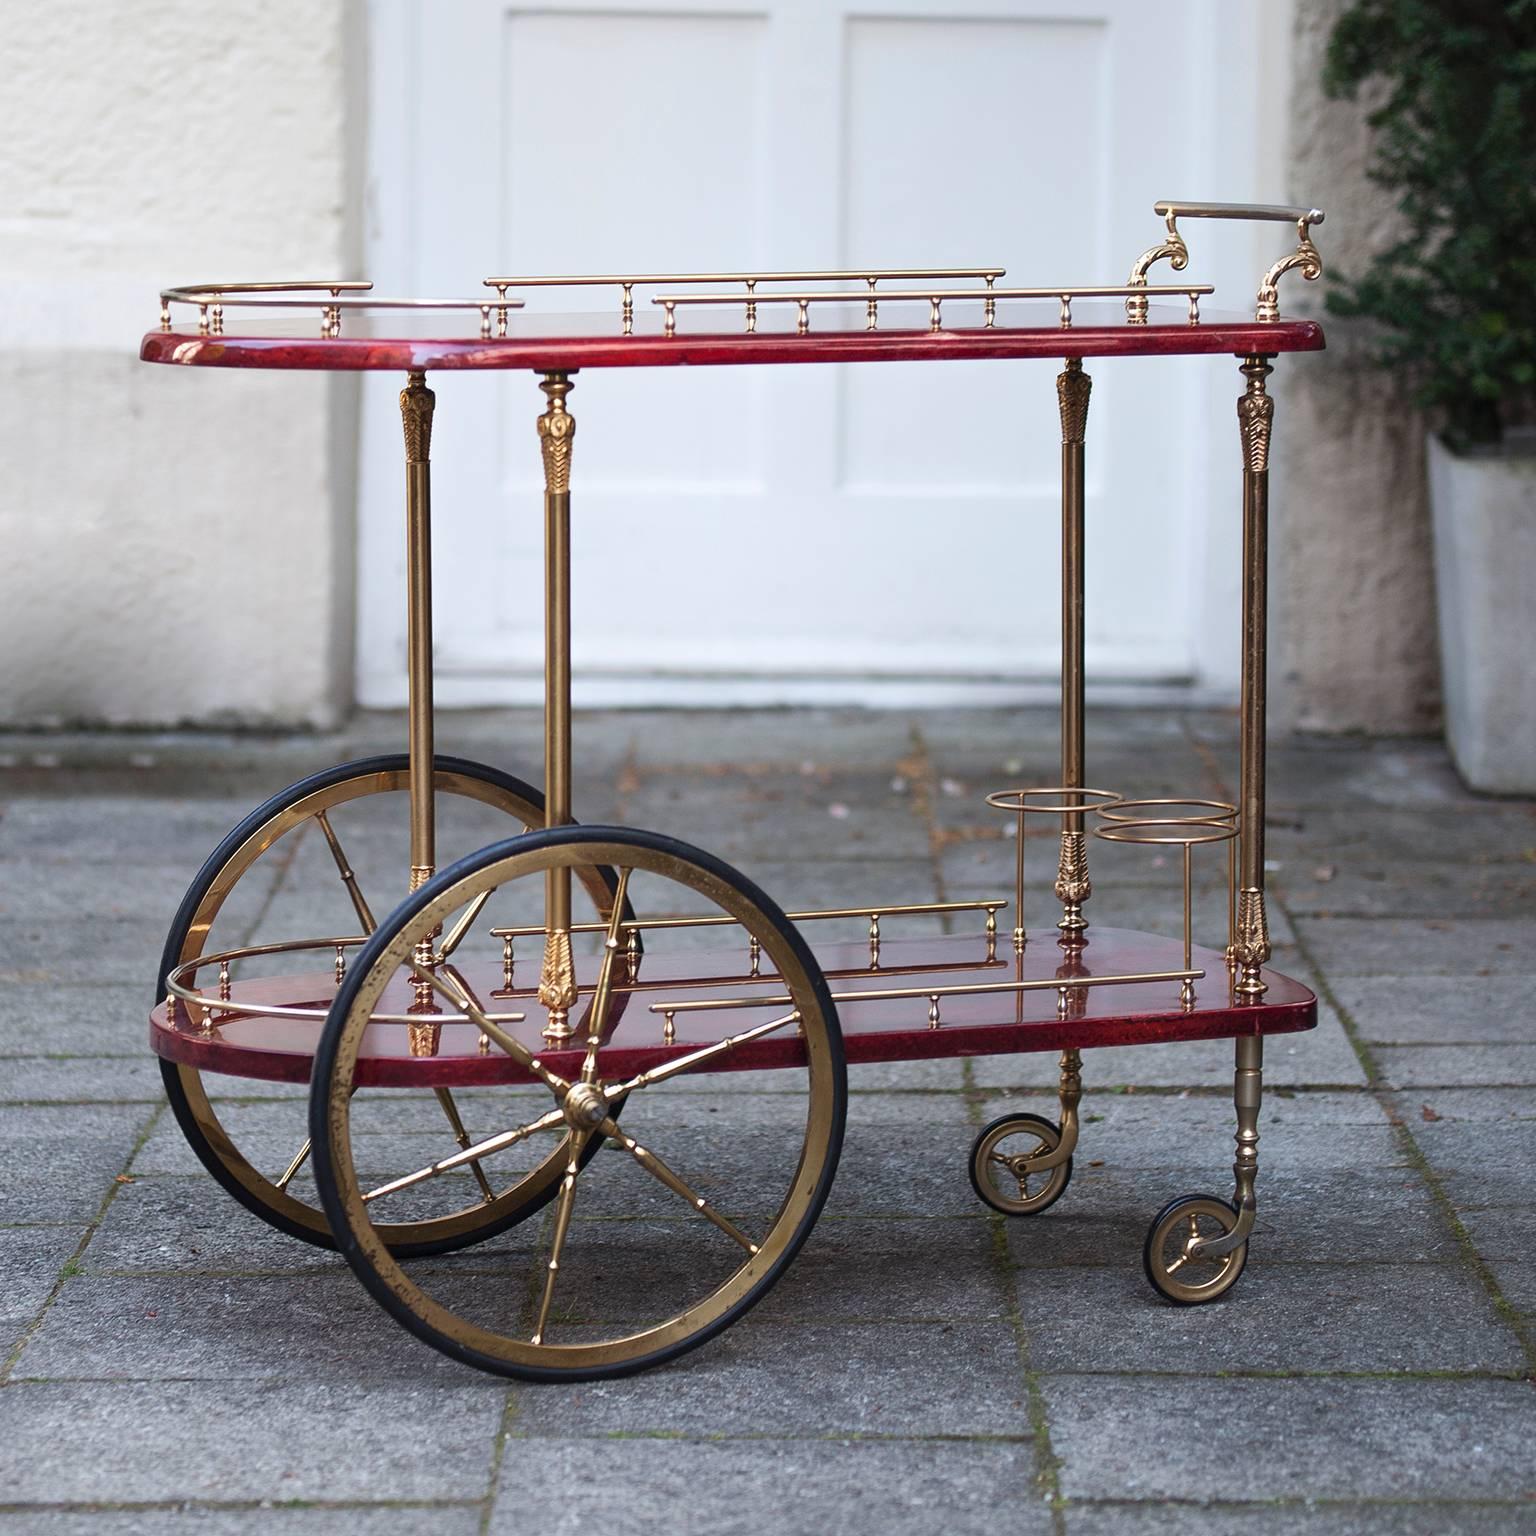 Colorful Italian service and bar cart by Aldo Tura, produced circa 1950s with two rounded tiers in red lacquered goatskin, each with brass galleries, the top with scrolled push handle, the bottom with three bottle holders on spoke wheels, separated